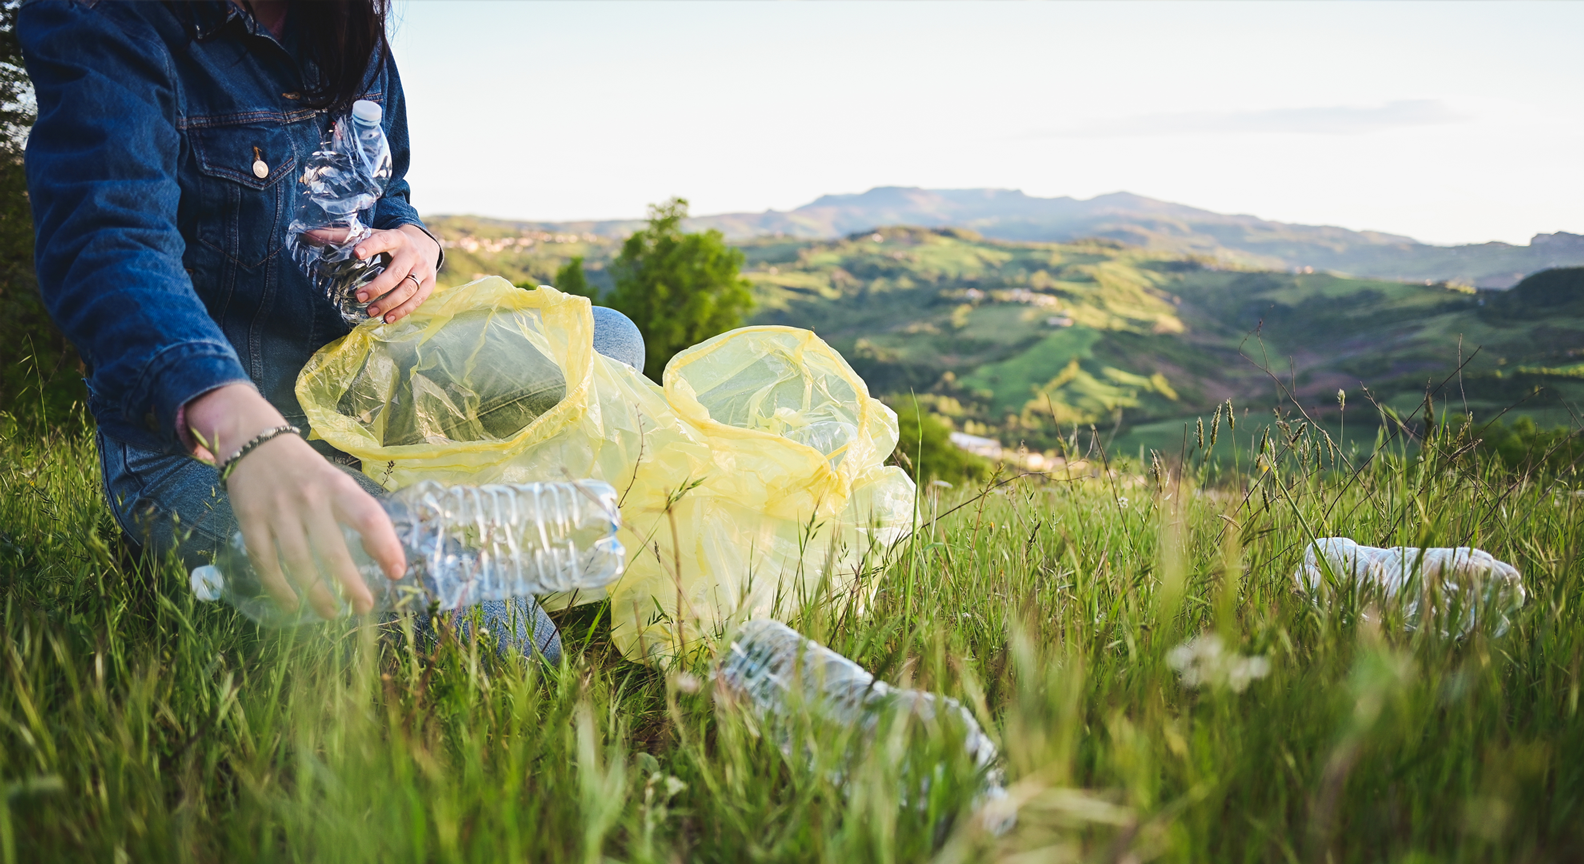 A person picking littered plastic bottles on a grassy hill